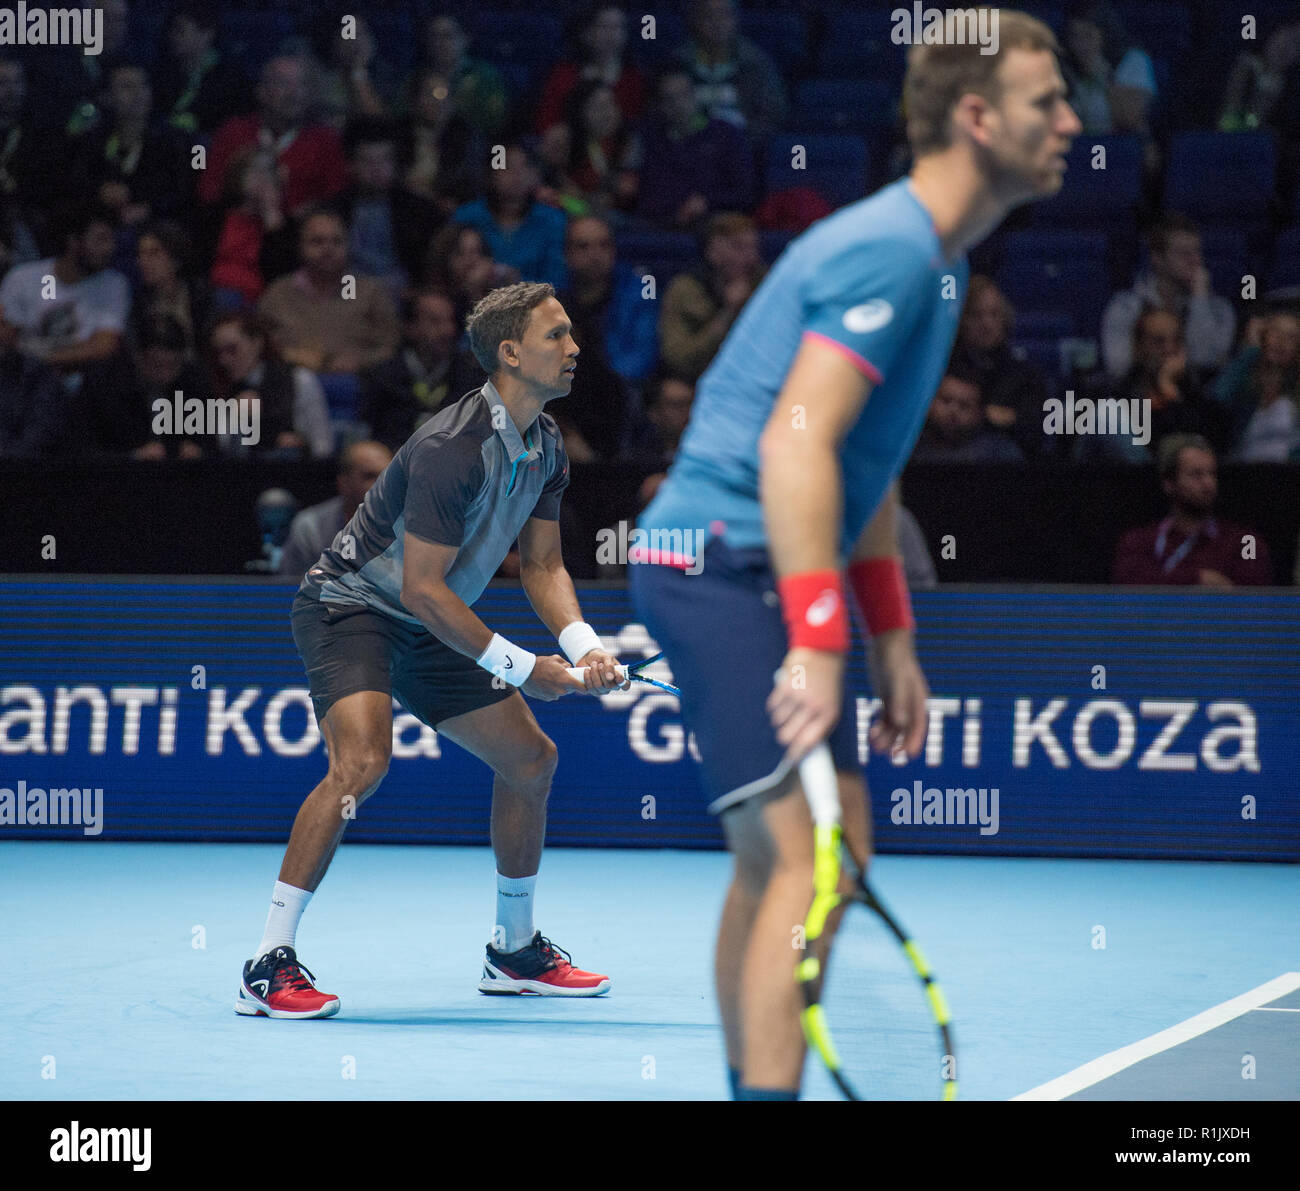 O2, London, UK. 13 November, 2018. Day three of the tournaments at the O2 arena in London afternoon doubles match. Raven Klaassen (RSA) and Michael Venus (NZL), ranked 6, vs Nikola Mektic (CRO) and Alexander Peya (AUT), ranked 7. Credit: Malcolm Park/Alamy Live News. Stock Photo